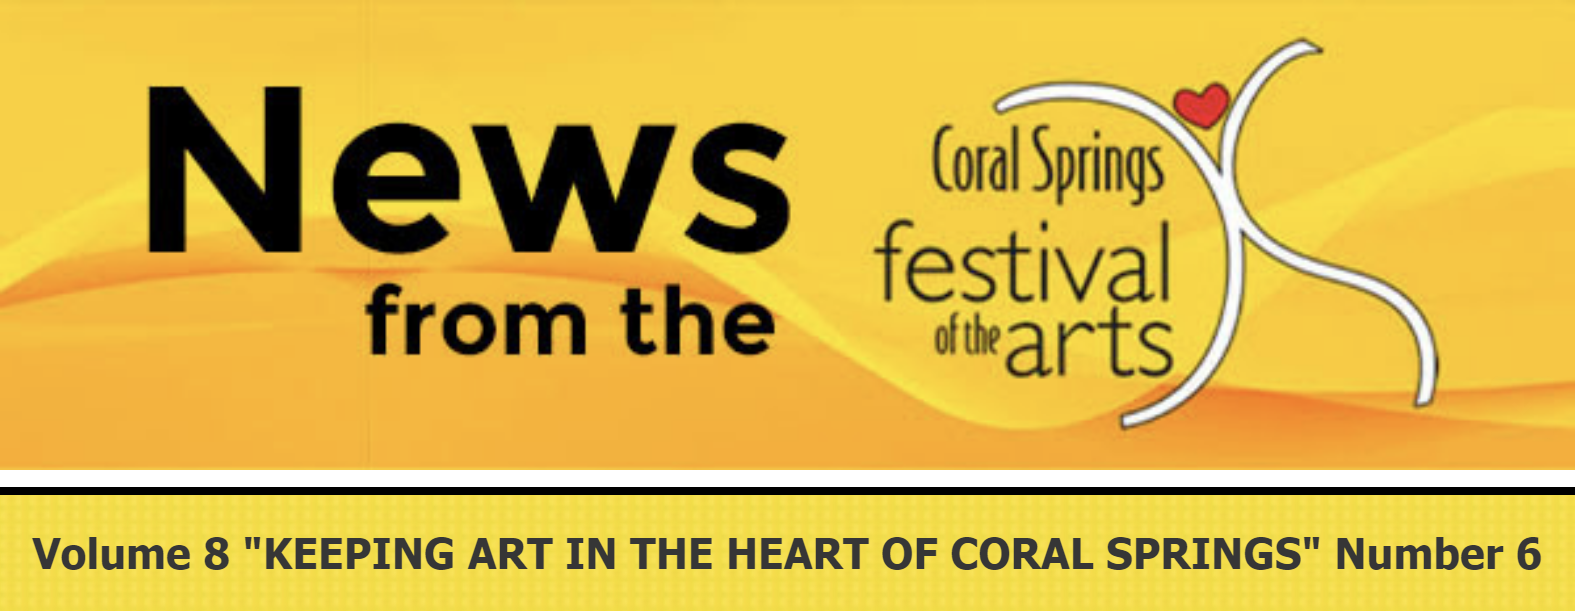 Thank You to All Who Helped Make the 18th Annual Coral Springs Festival of the Arts a Success